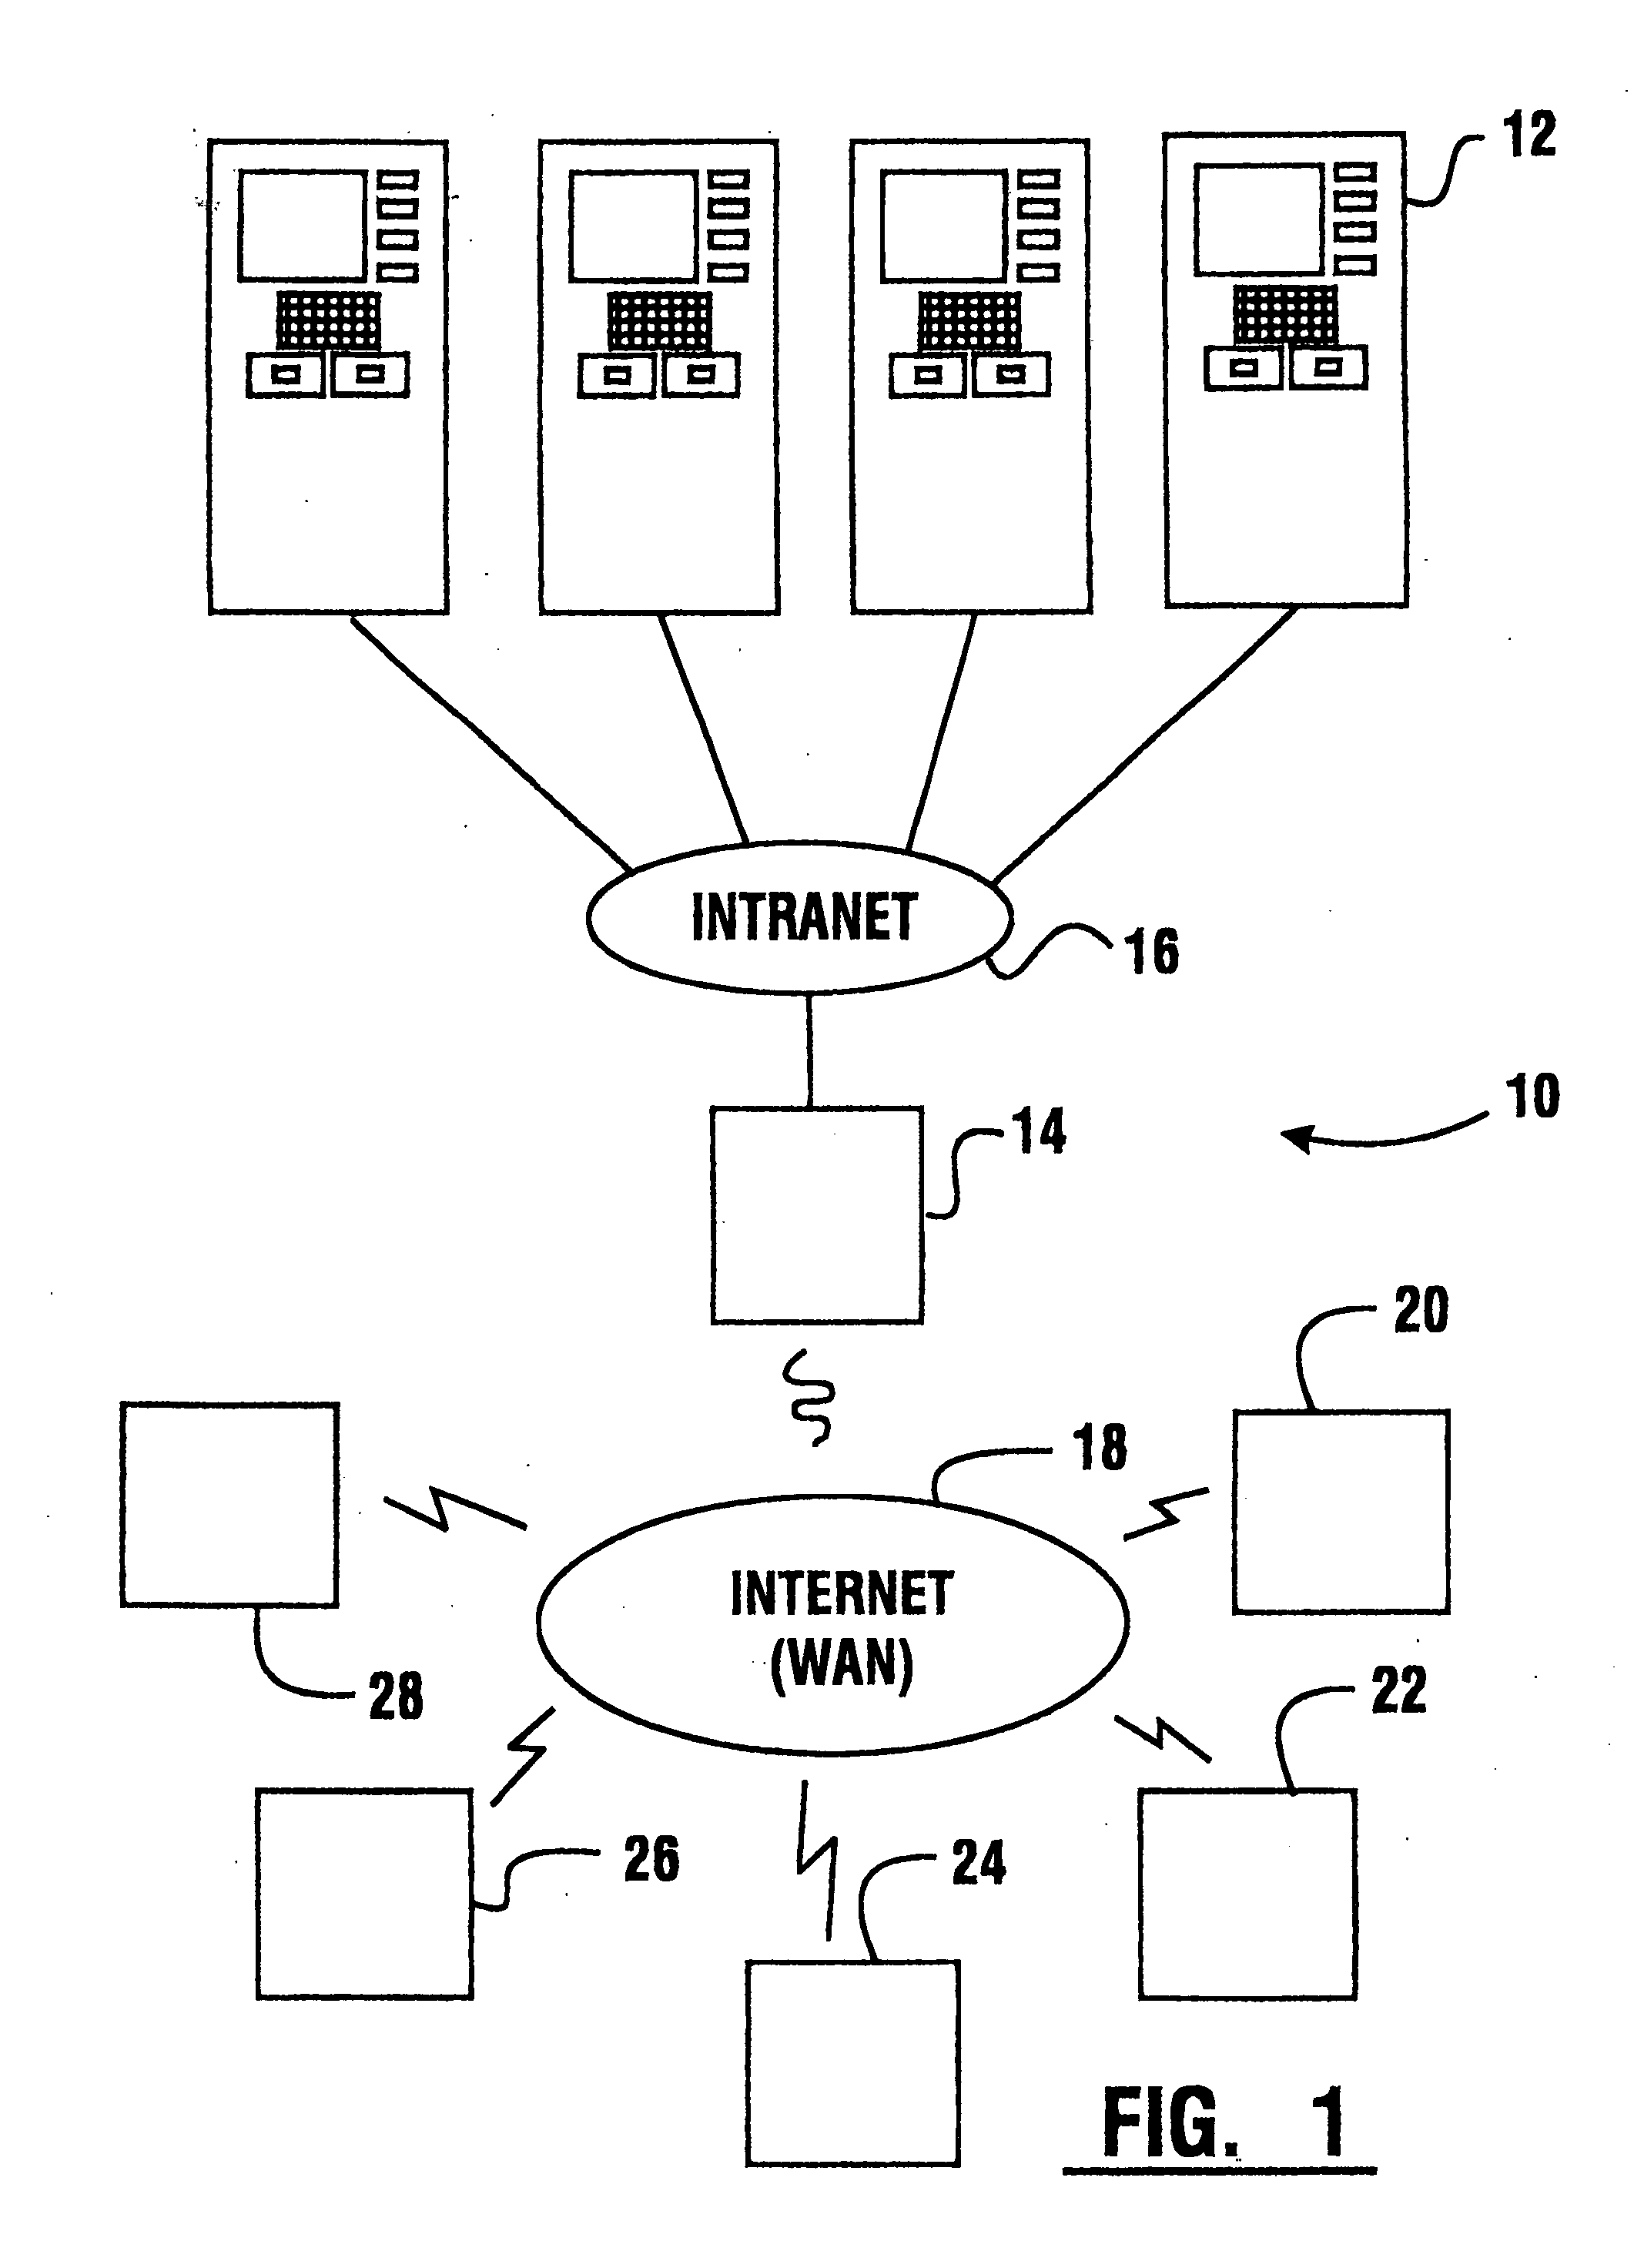 Method of developing automated banking machine instructions